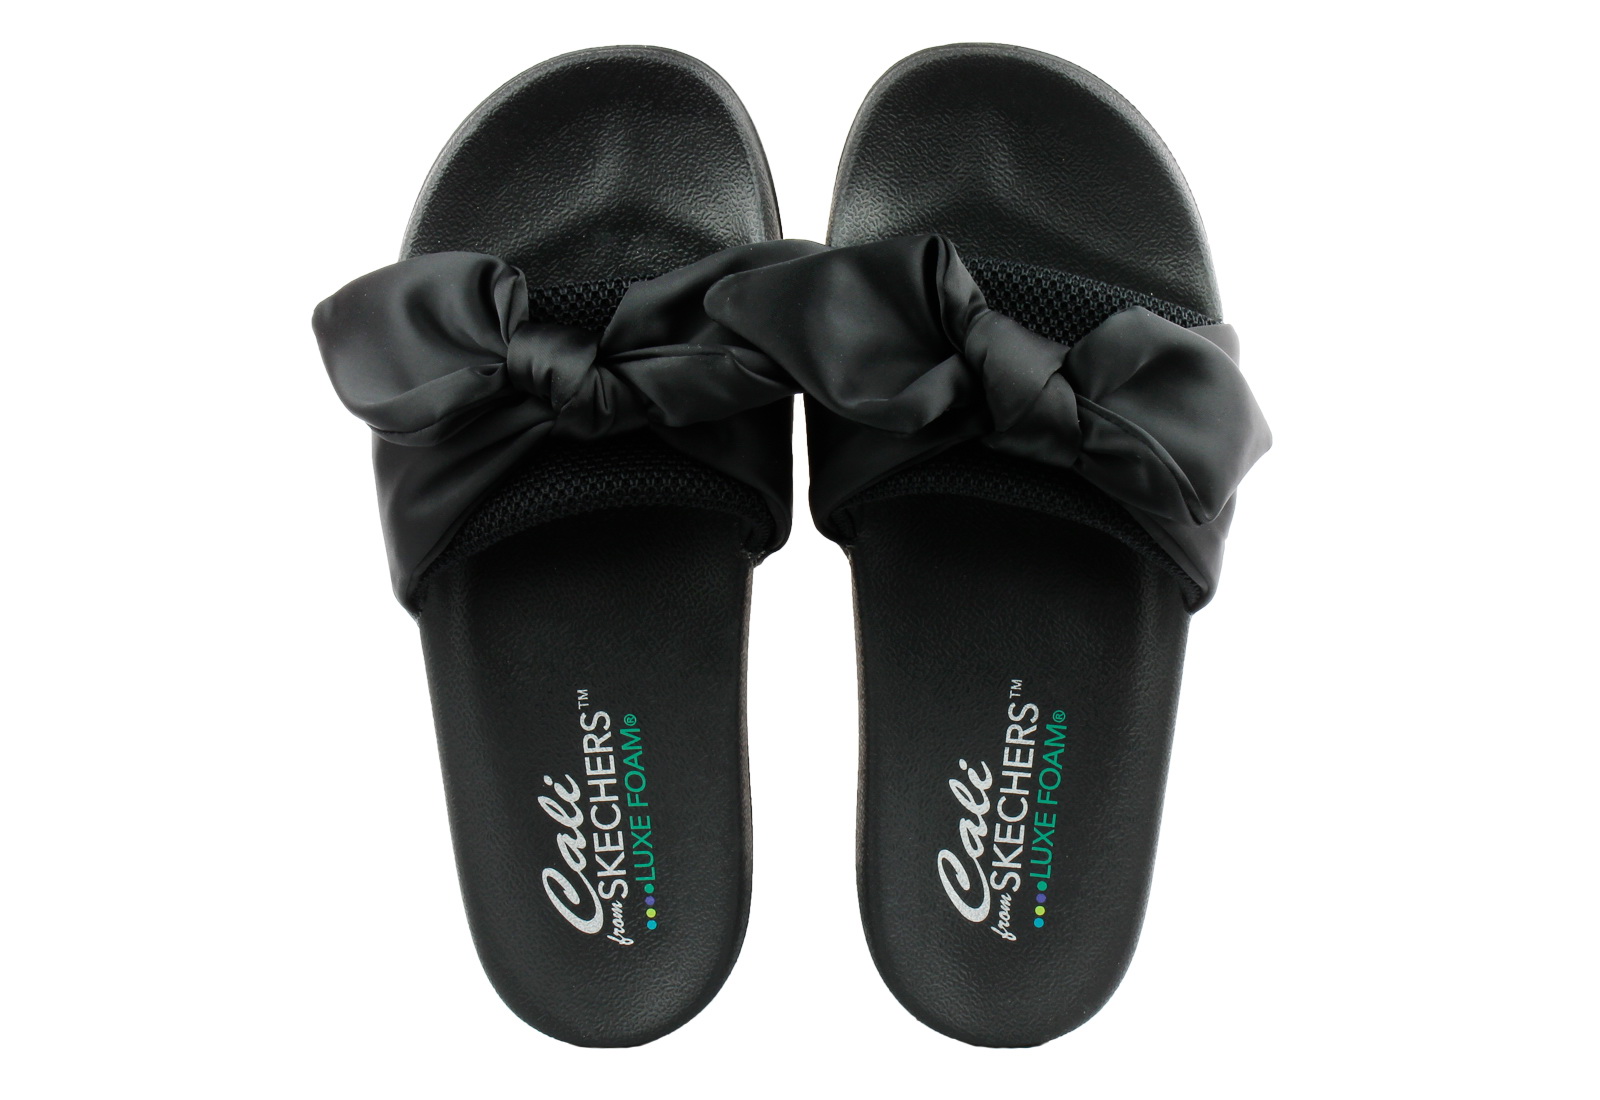 Skechers Papuci Pop Ups-lovely Bow